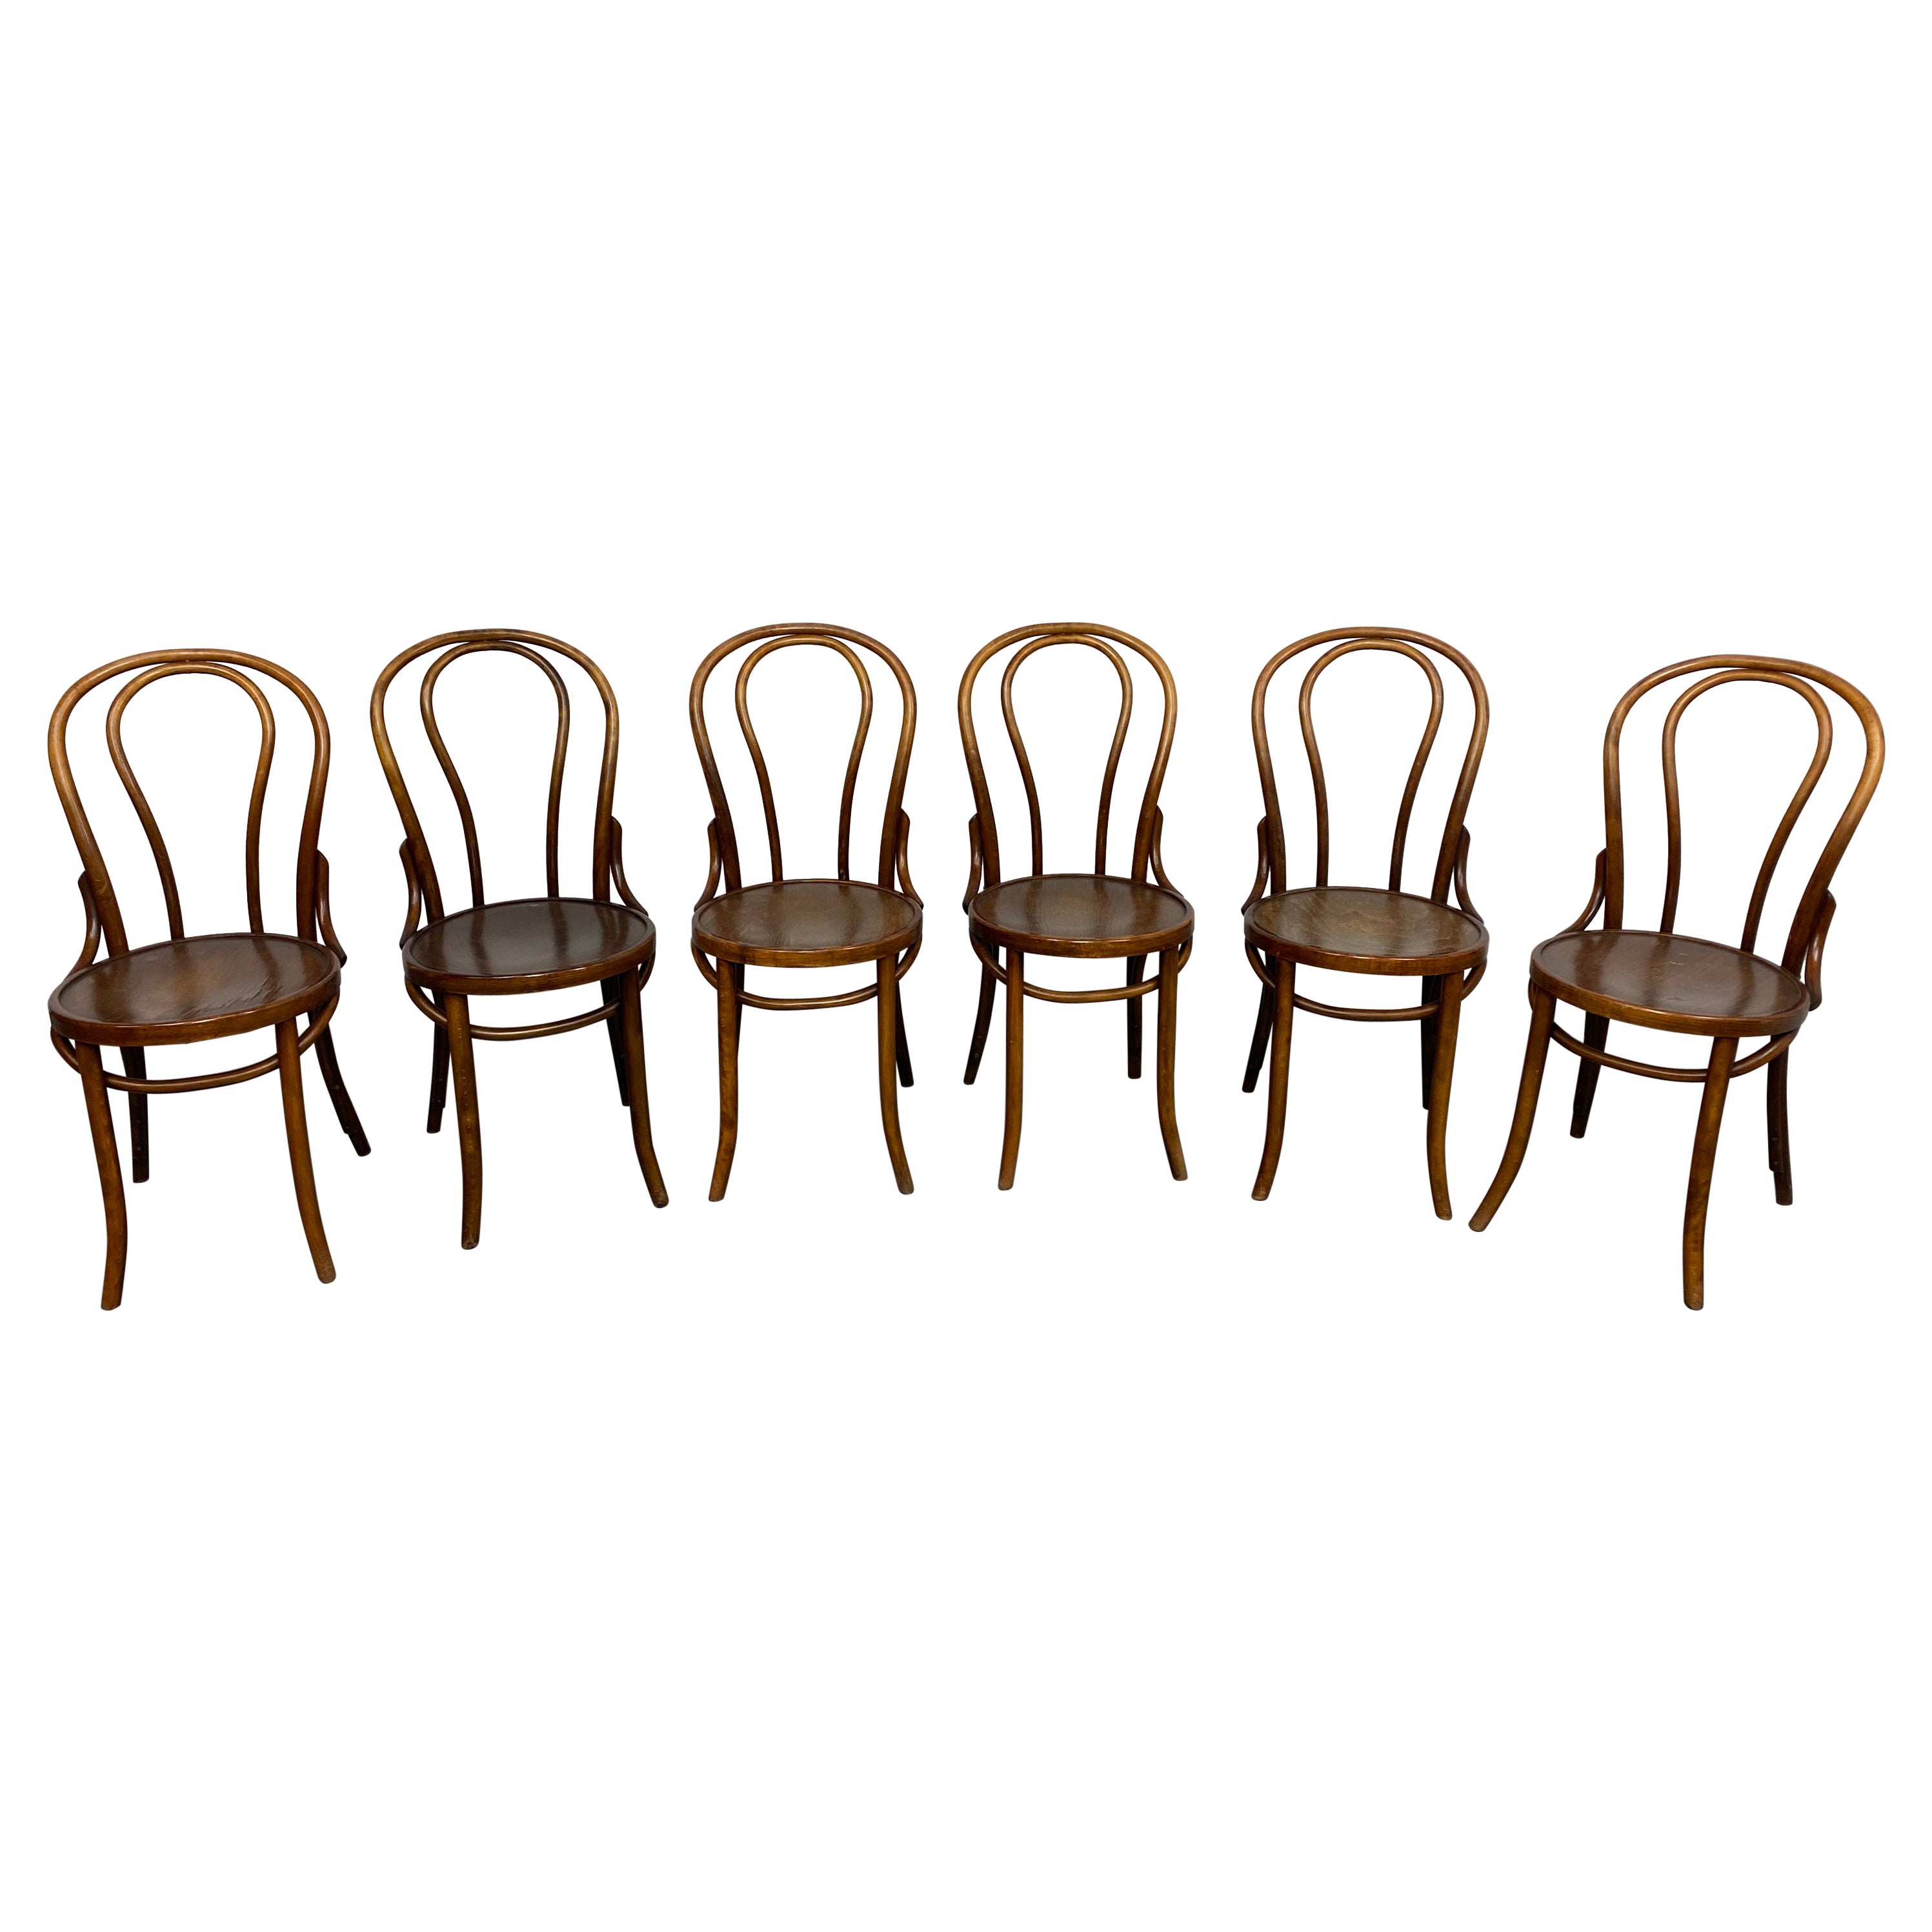 Set of 6 Thonet dining chairs no.16